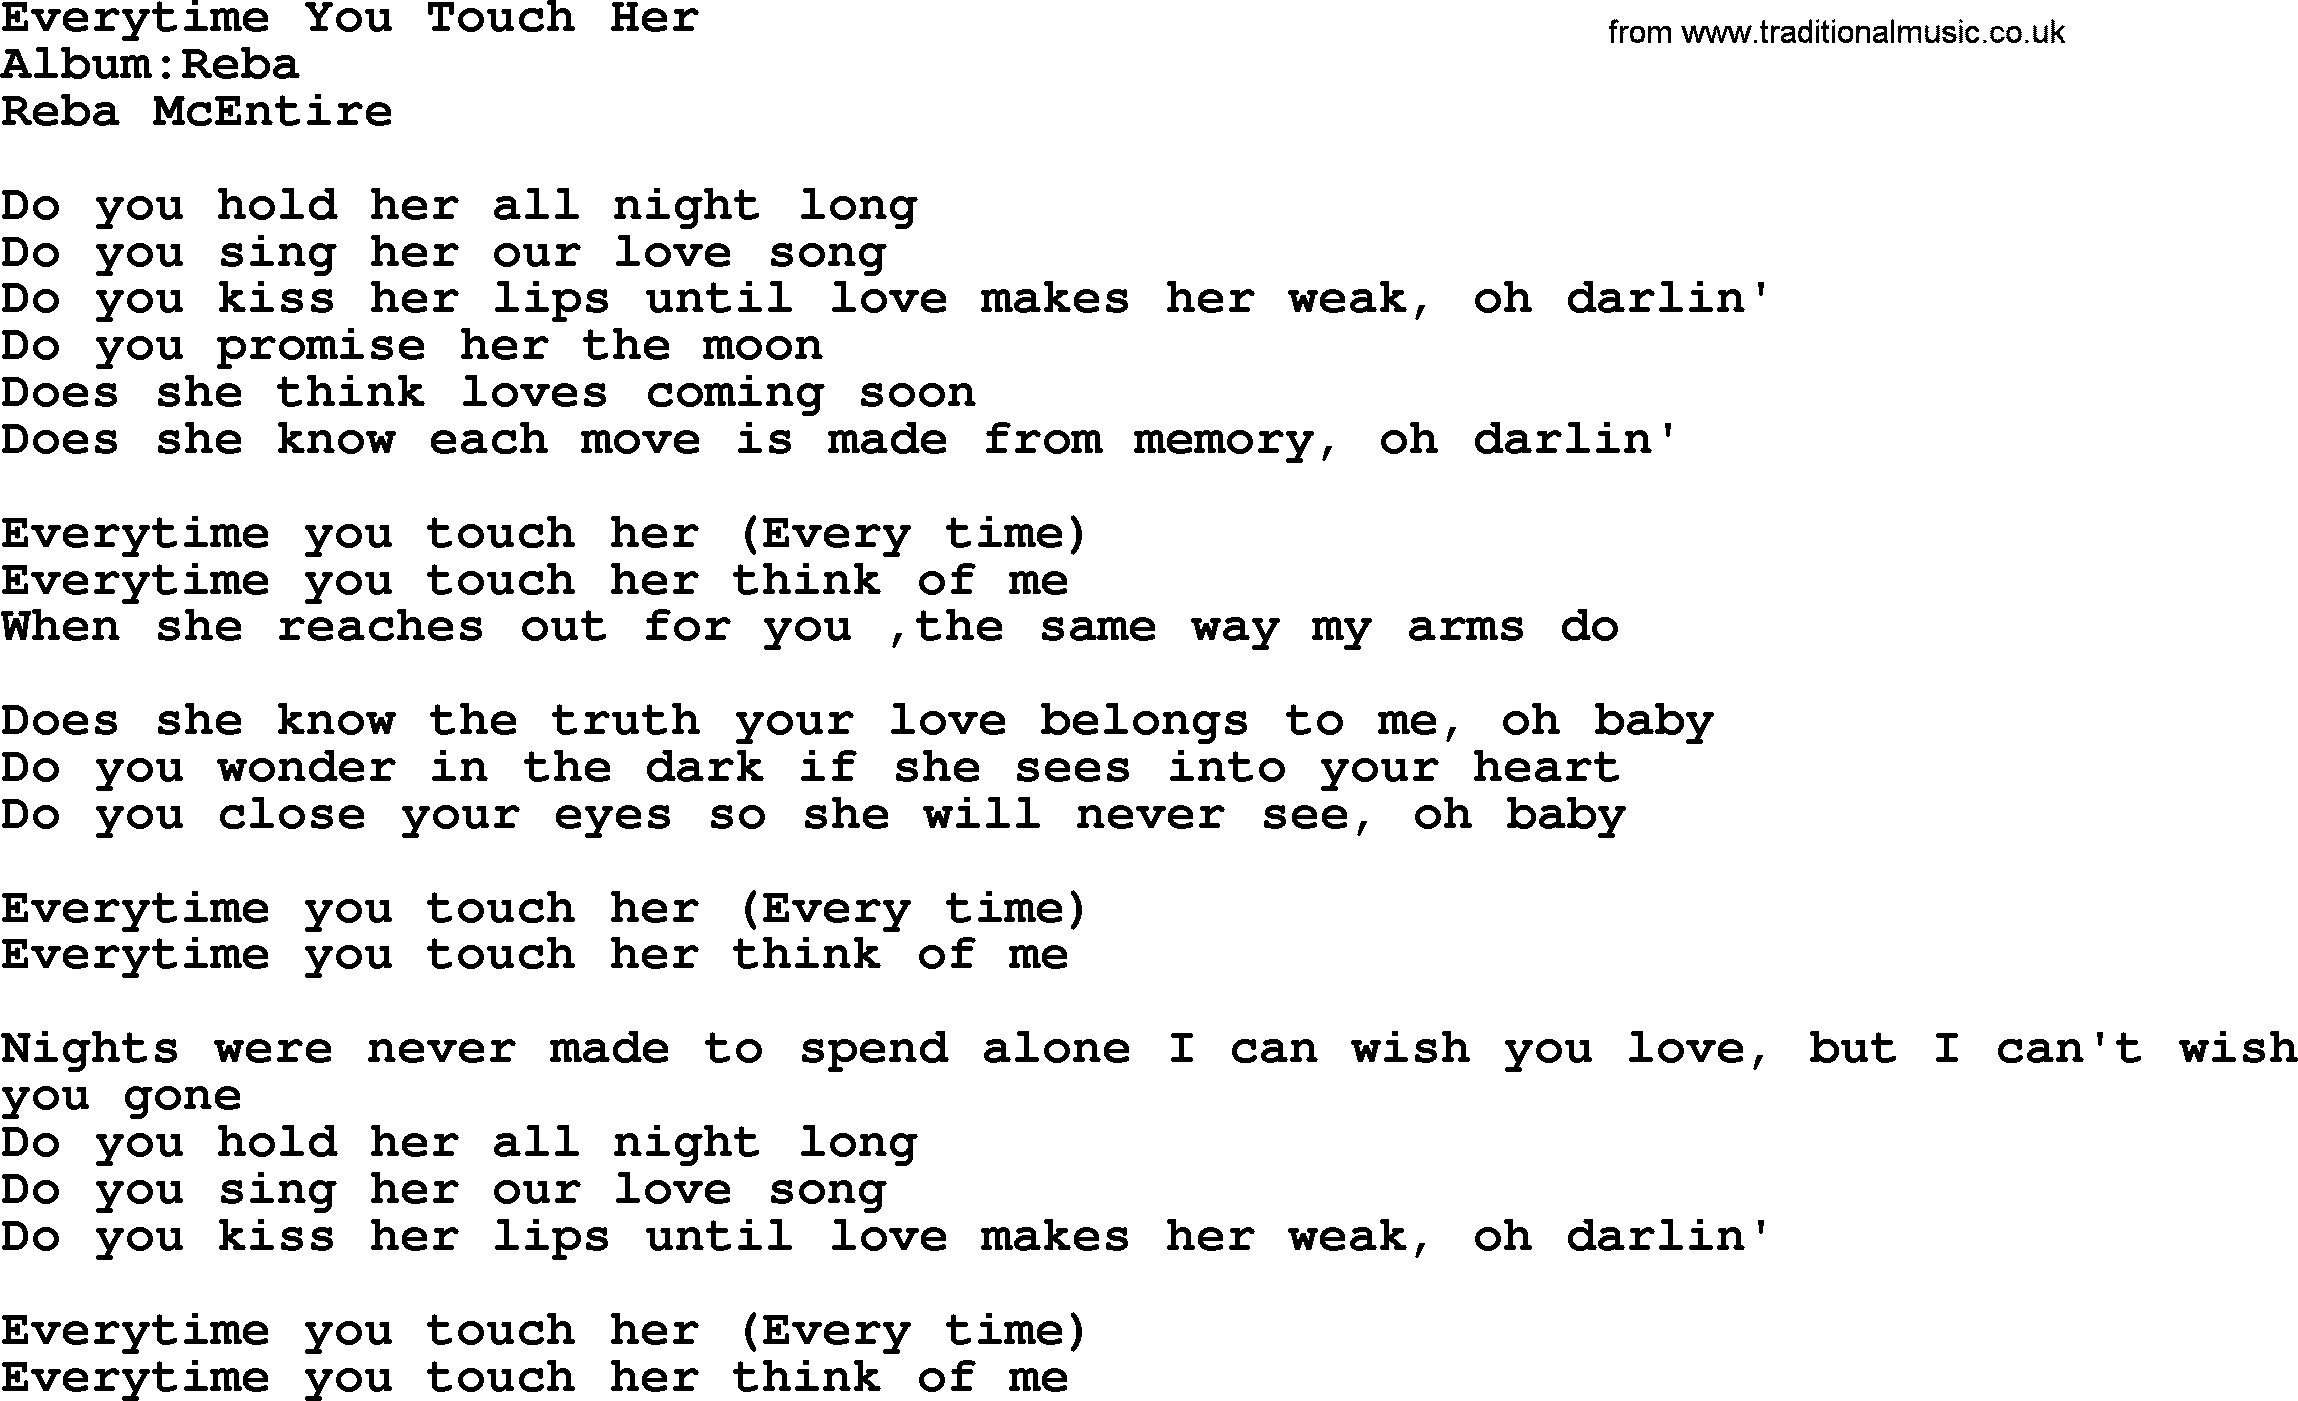 Reba McEntire song: Everytime You Touch Her lyrics